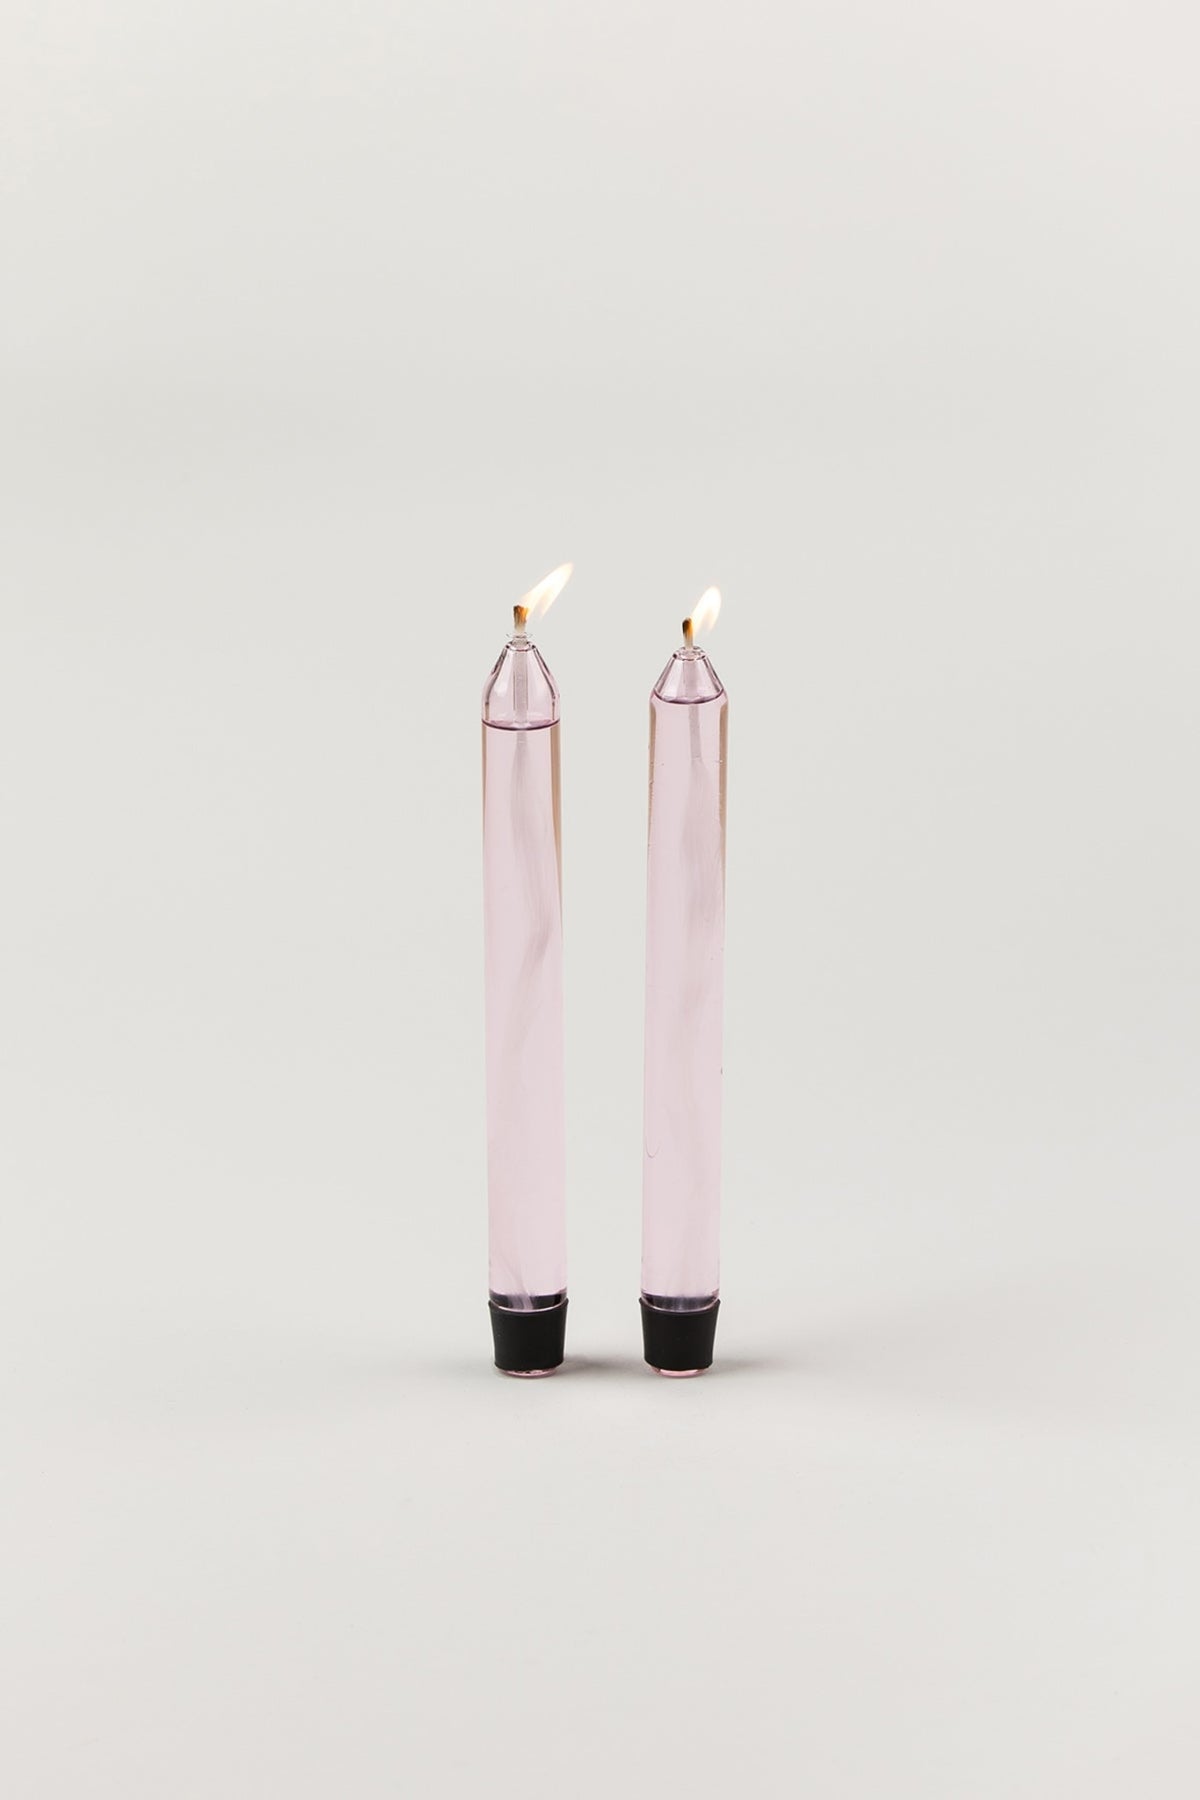 GLASS CANDLES, OIL CANDLES, ROSE